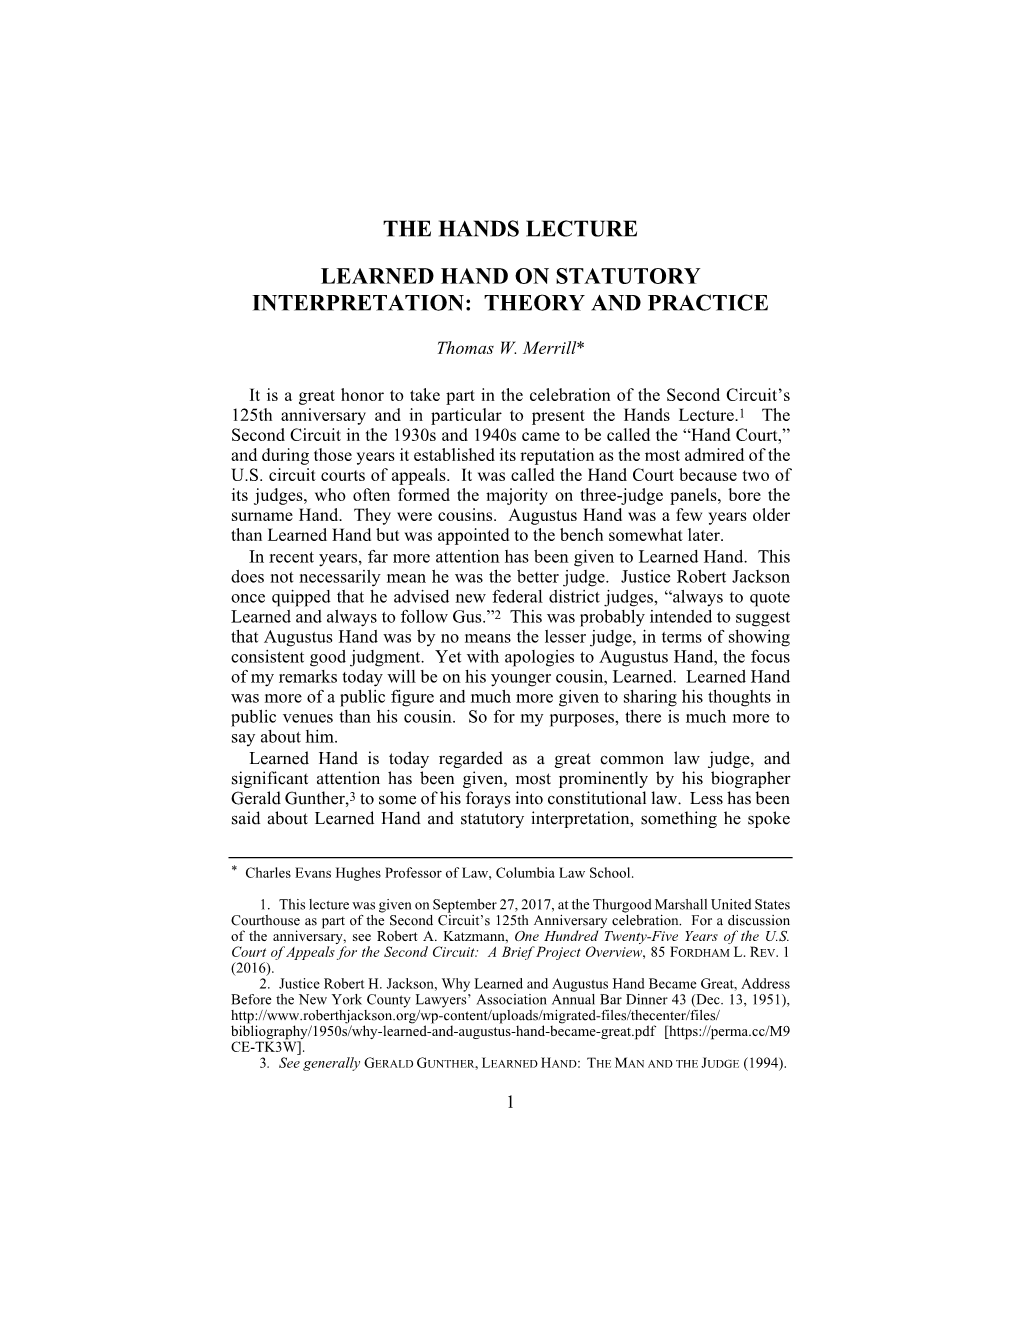 The Hands Lecture Learned Hand on Statutory Interpretation: Theory and Practice